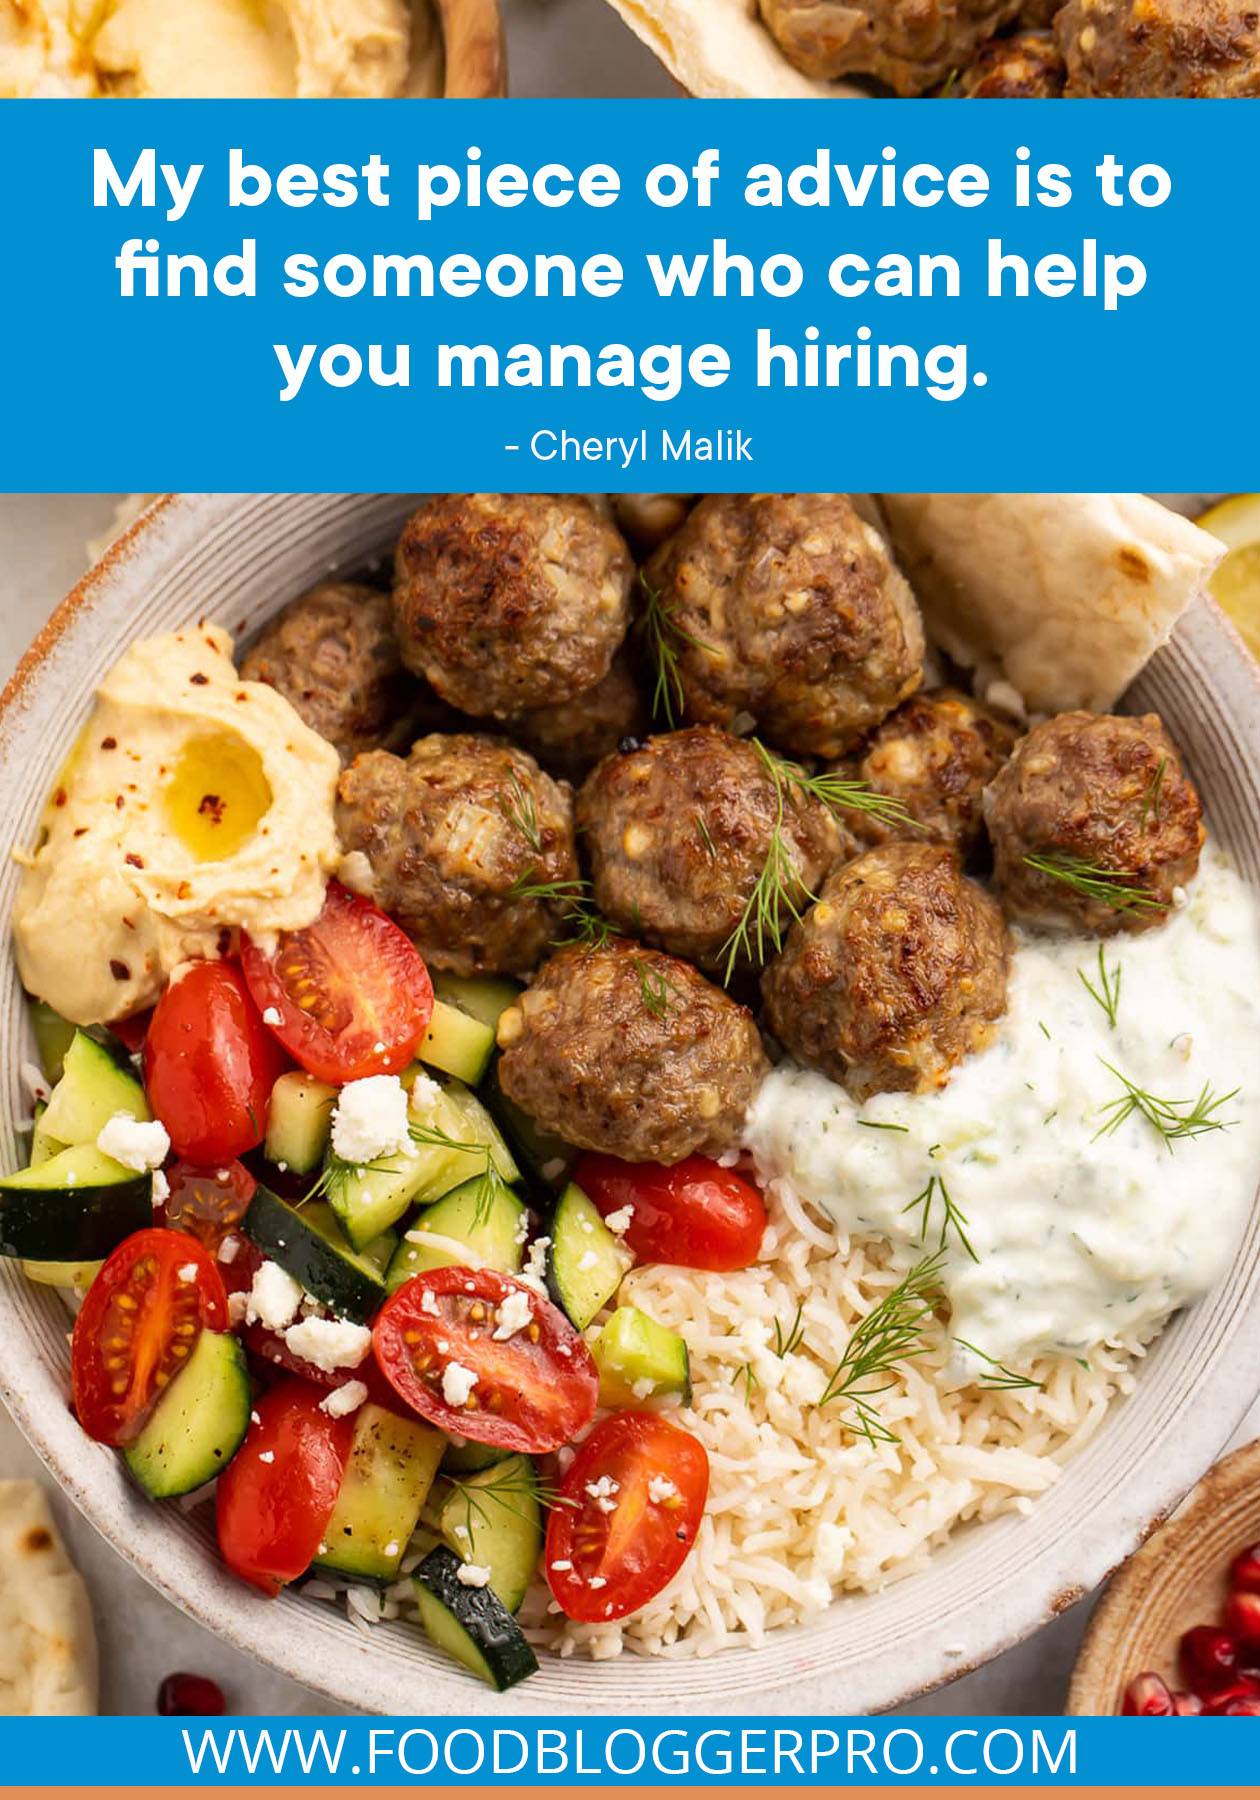 A photograph of meatballs, rice, tomatoes, cucumbers, and dips in a grey bowl with a quote from Cheryl Malik's episode of The Food Blogger Pro Podcast, "My best piece of advice is to find someone who can help you manage hiring."